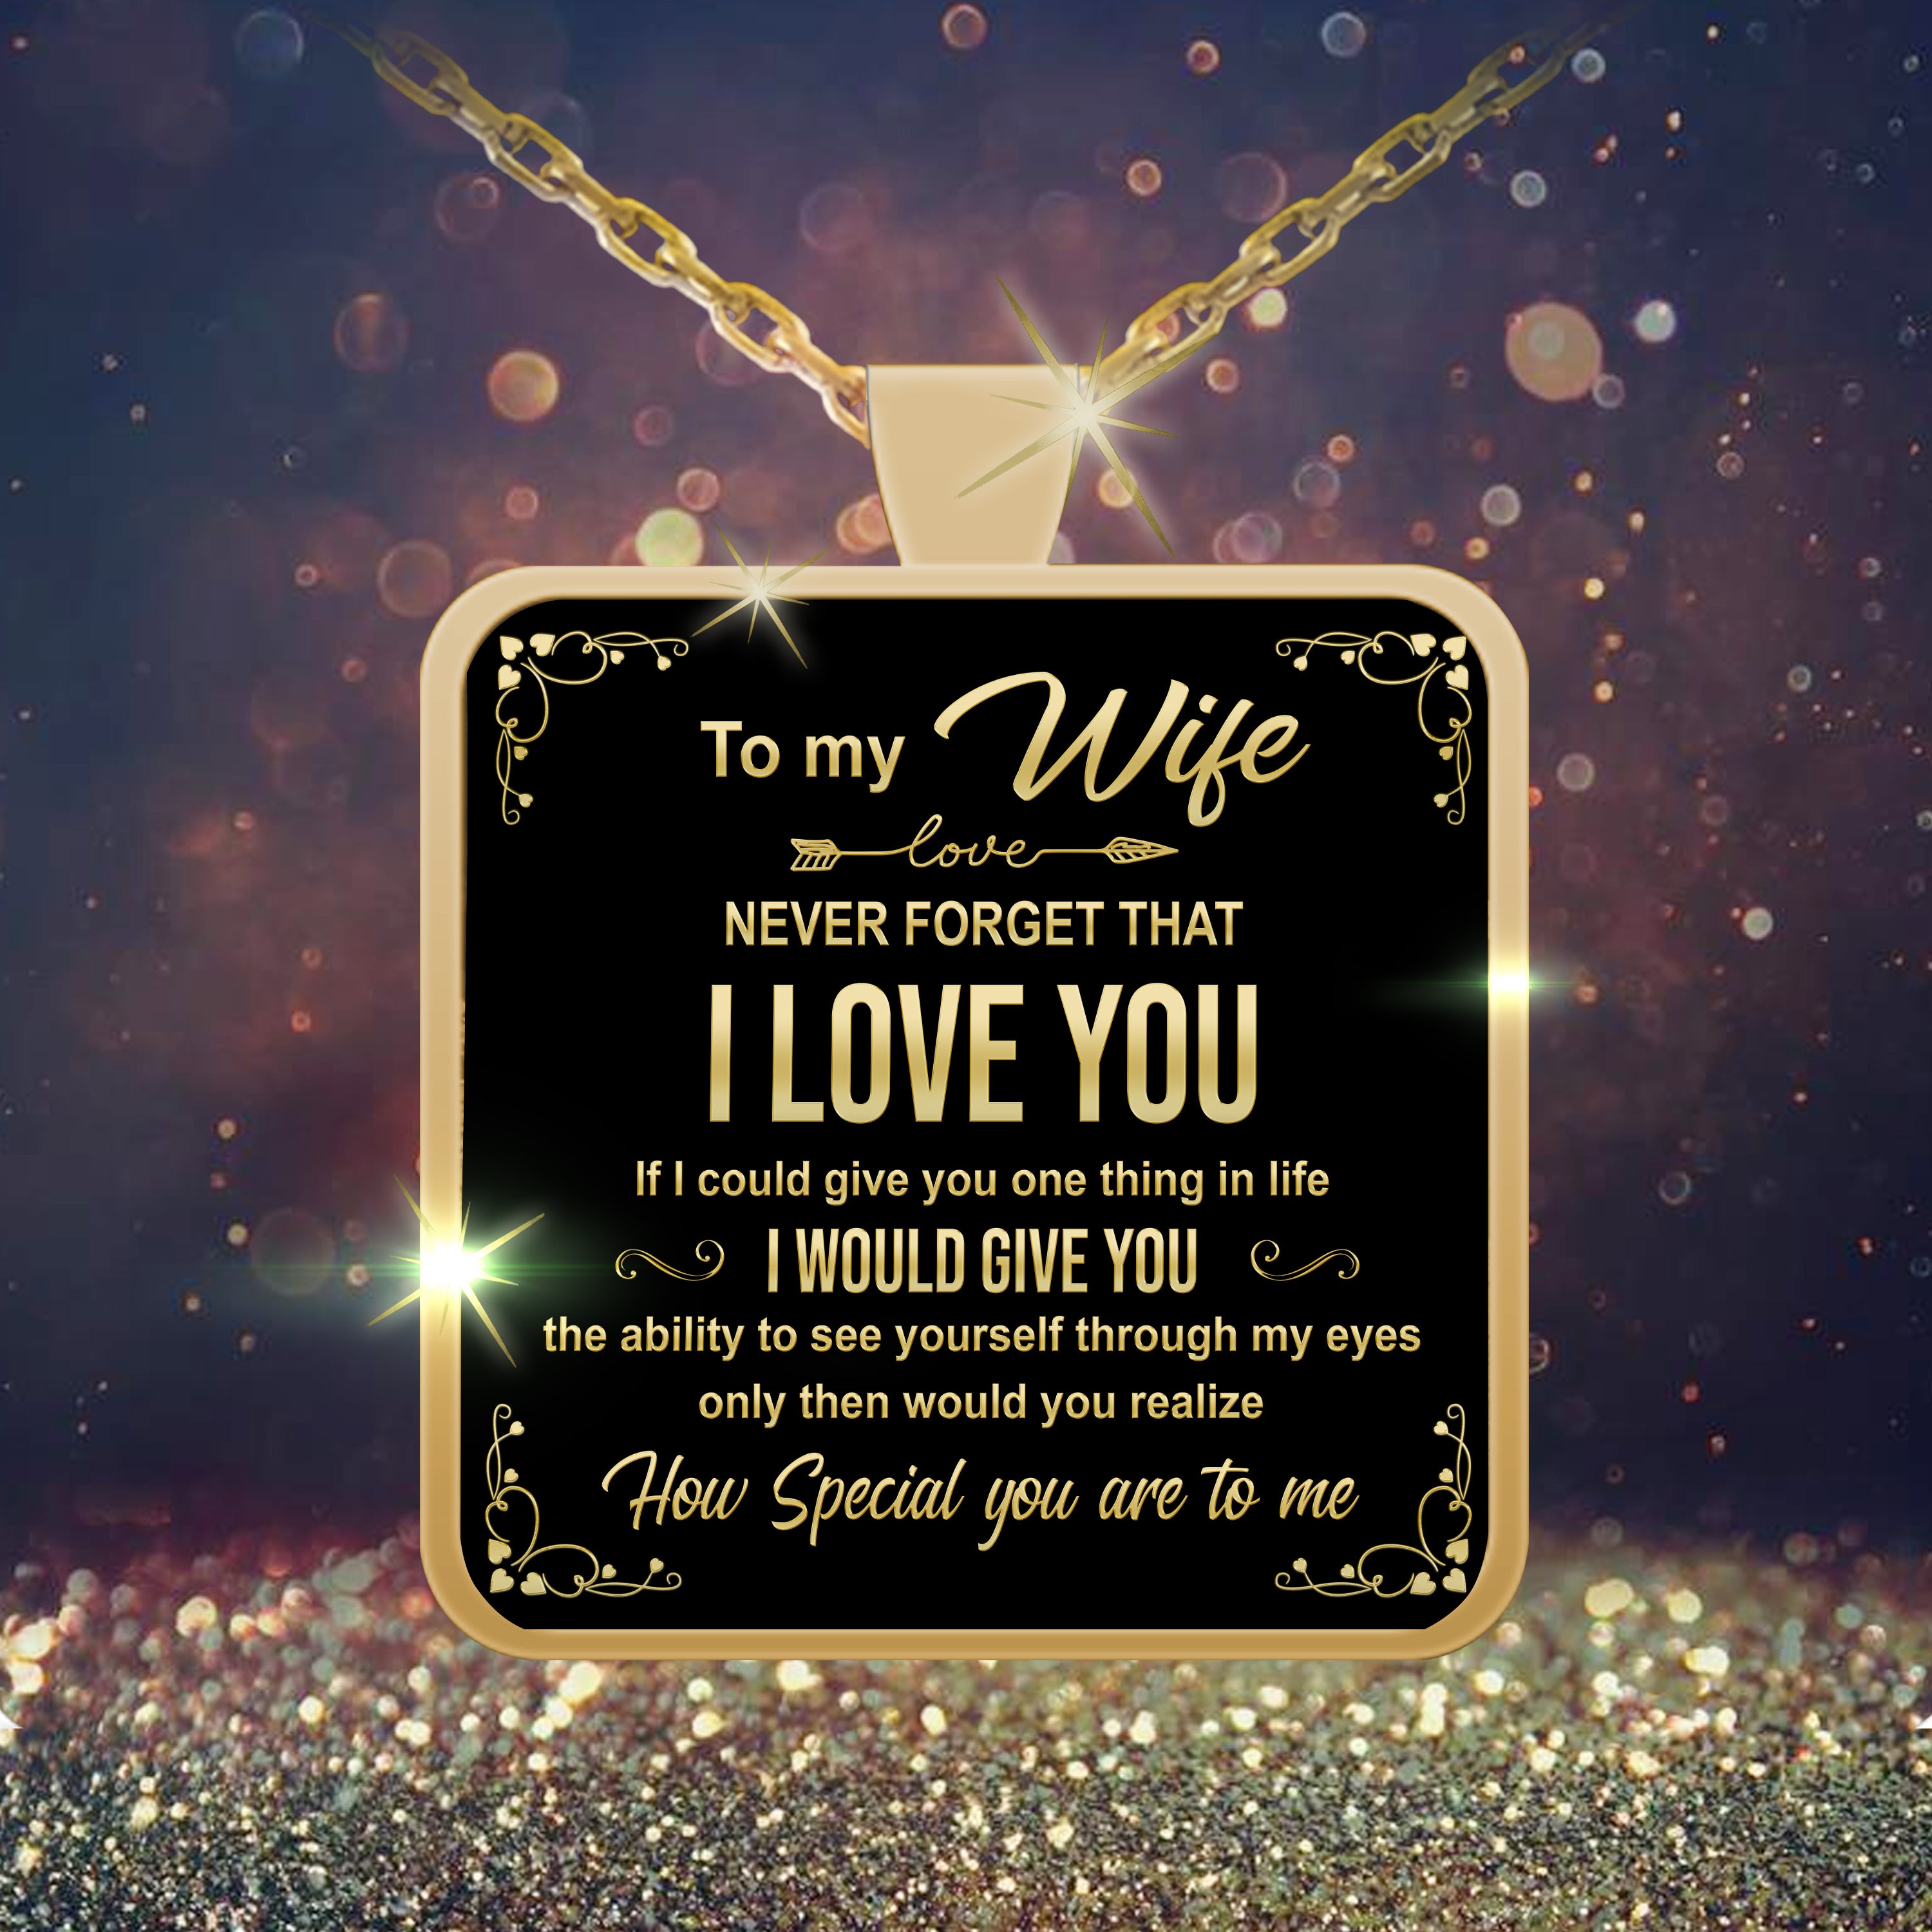 To My Wife - "You Are Special" Gold Pendant Necklace